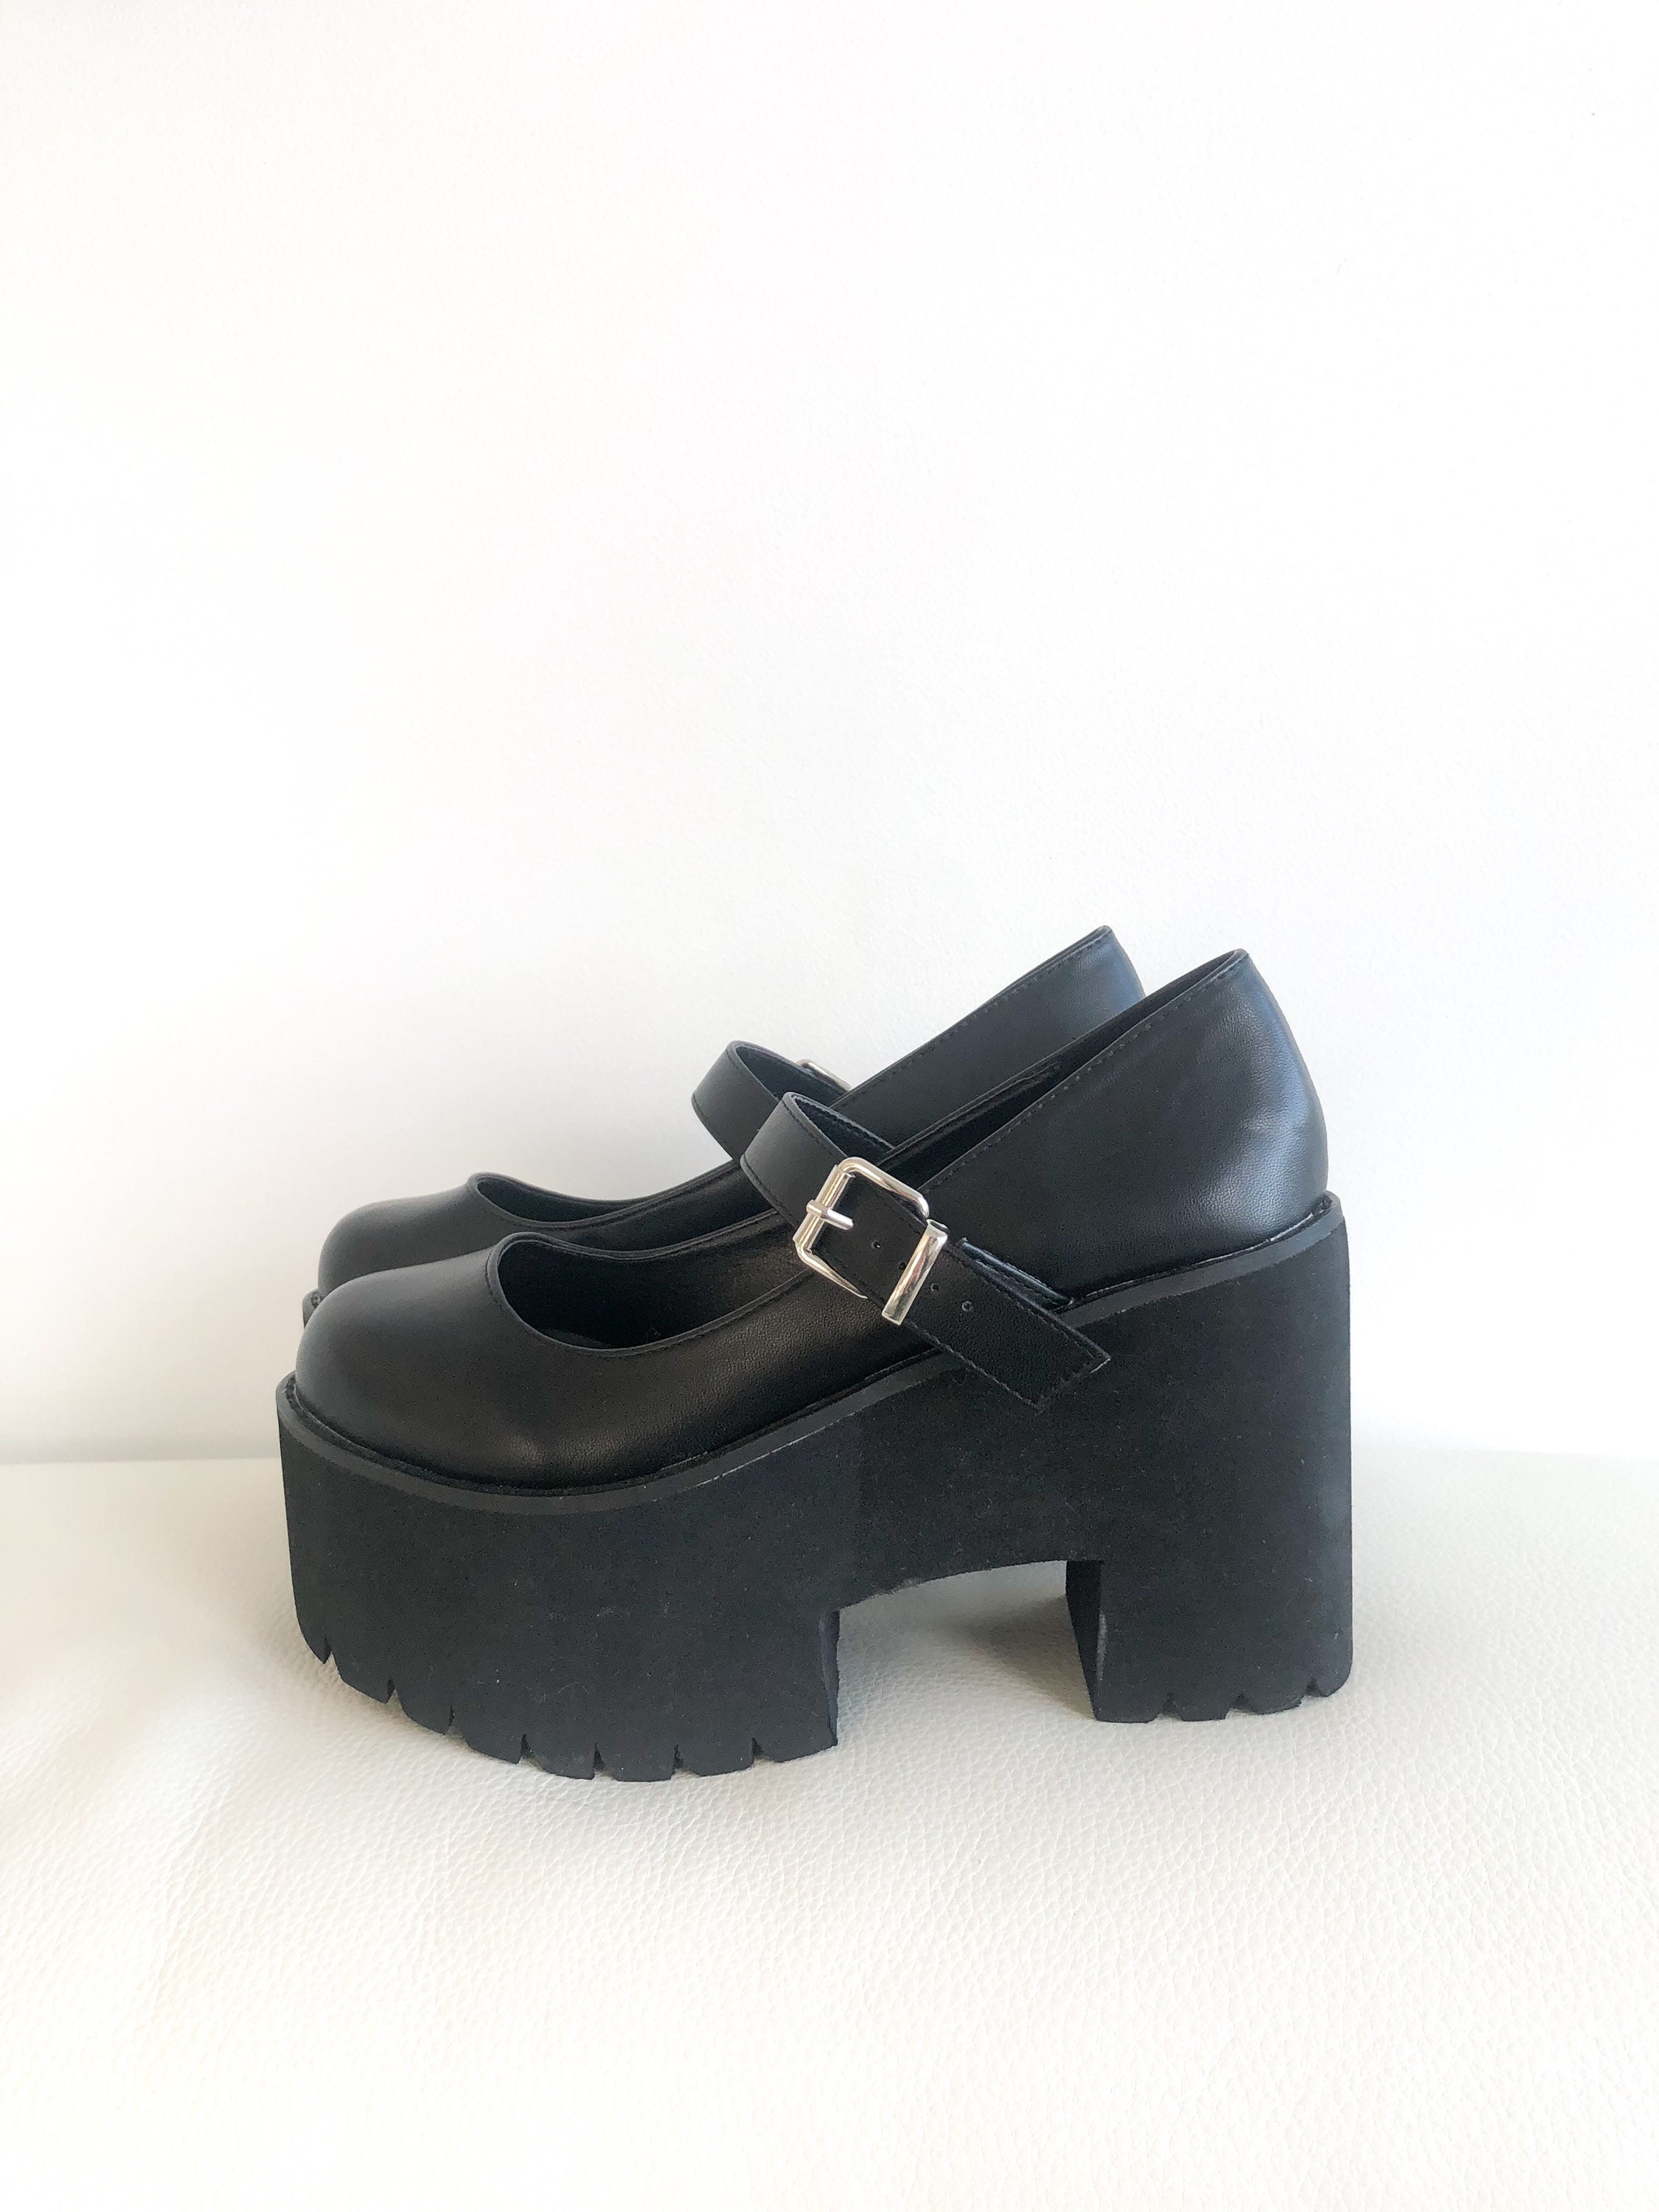 black Leather loafers Vintage Leather Loafers 90s shoes chunky mary janes 90s stompers 90s mary janes 90s platform mary janes